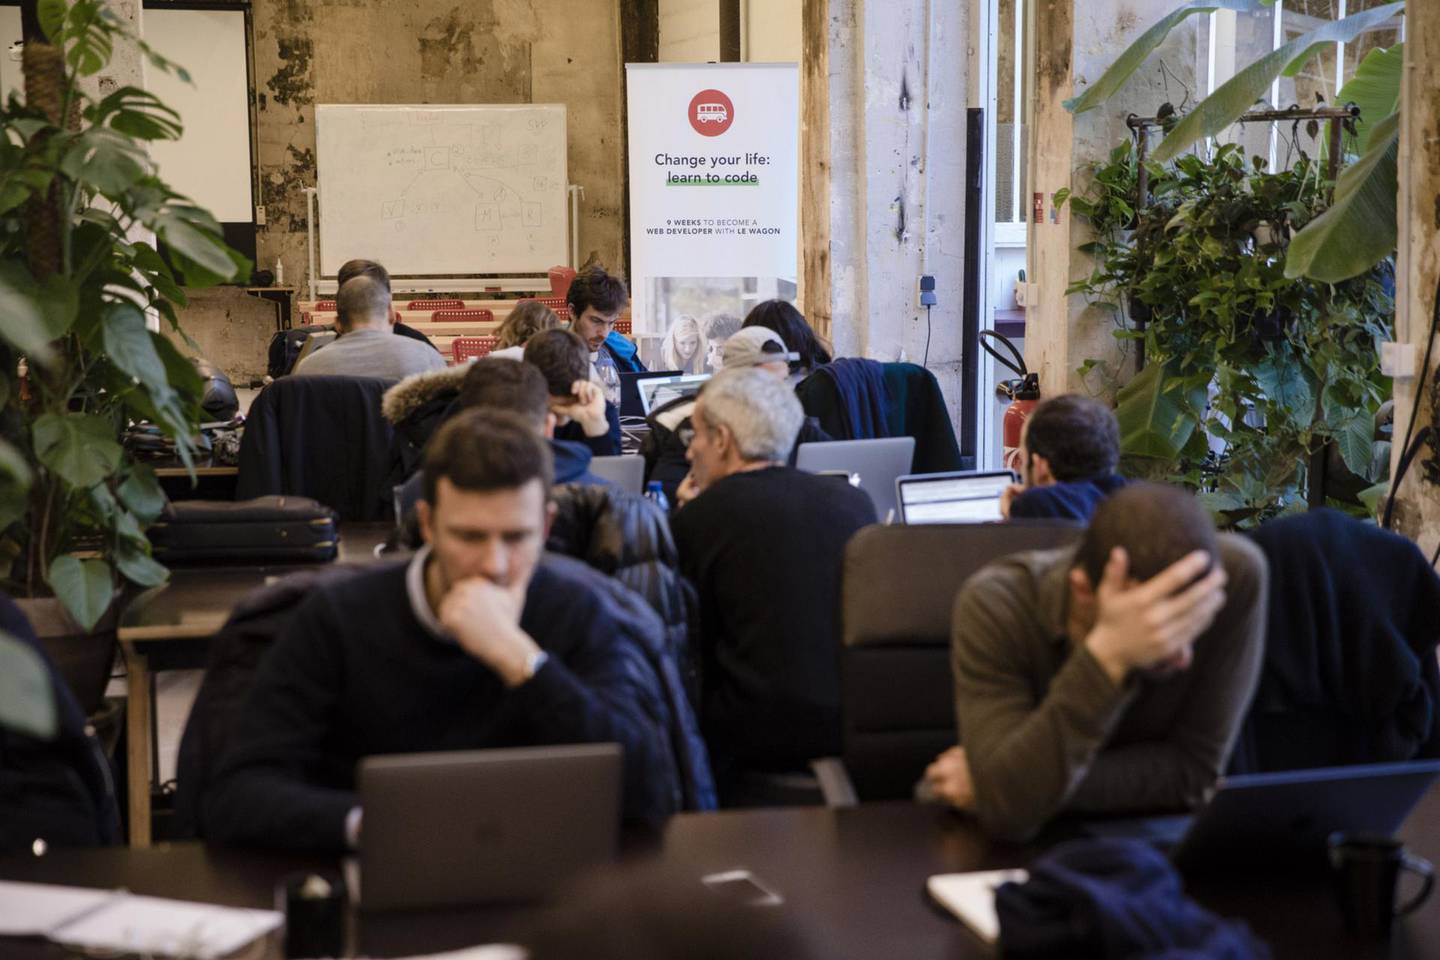 Students work at laptops at Le Wagon coding boot camp in Paris, France, on Monday, Jan. 22, 2018. Boris Paillard, who once developed equity and rates models at HSBC’s Paris office, is now co-founder of Le Wagon, a 9-week $8,000 boot camp that teaches computer code to a growing number of bankers, consultants and marketing types. Photographer: Marlene Awaad/Bloomberg